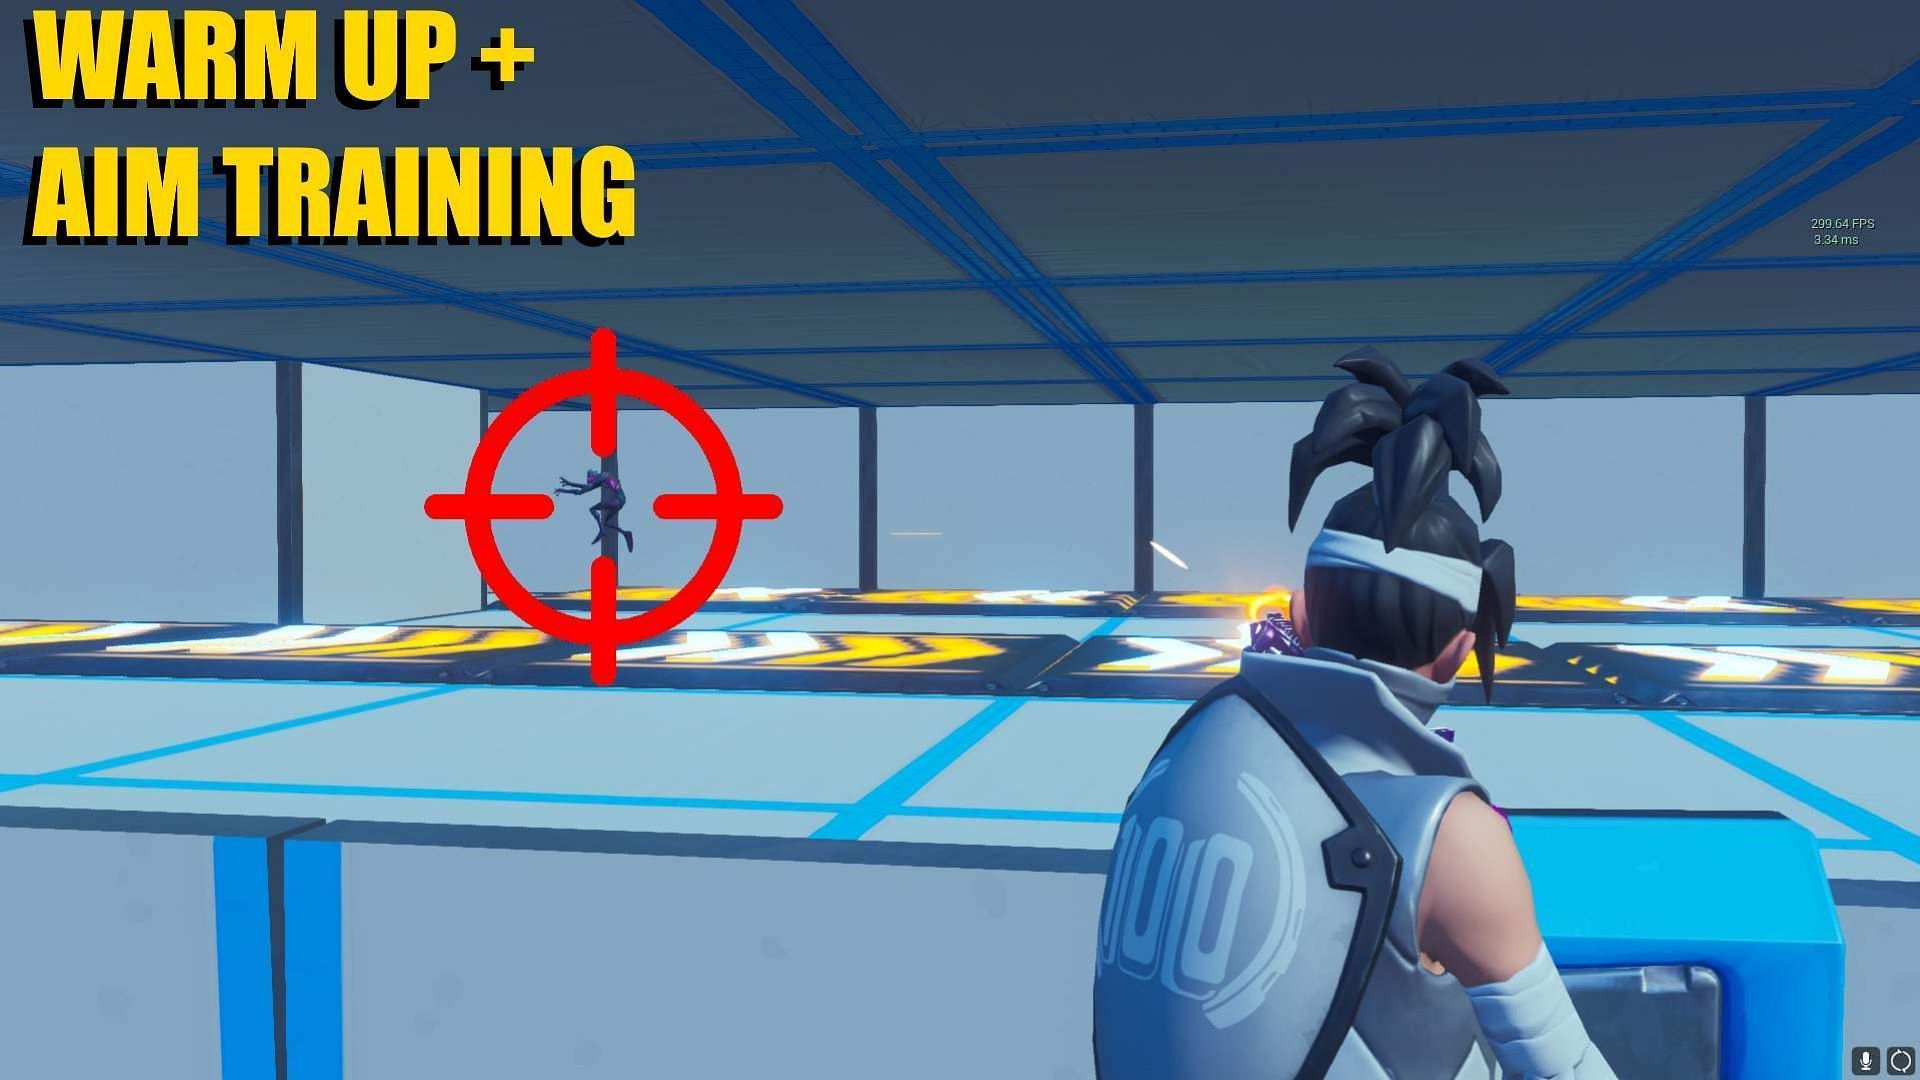 6 best aim training maps in Fortnite as of 2022